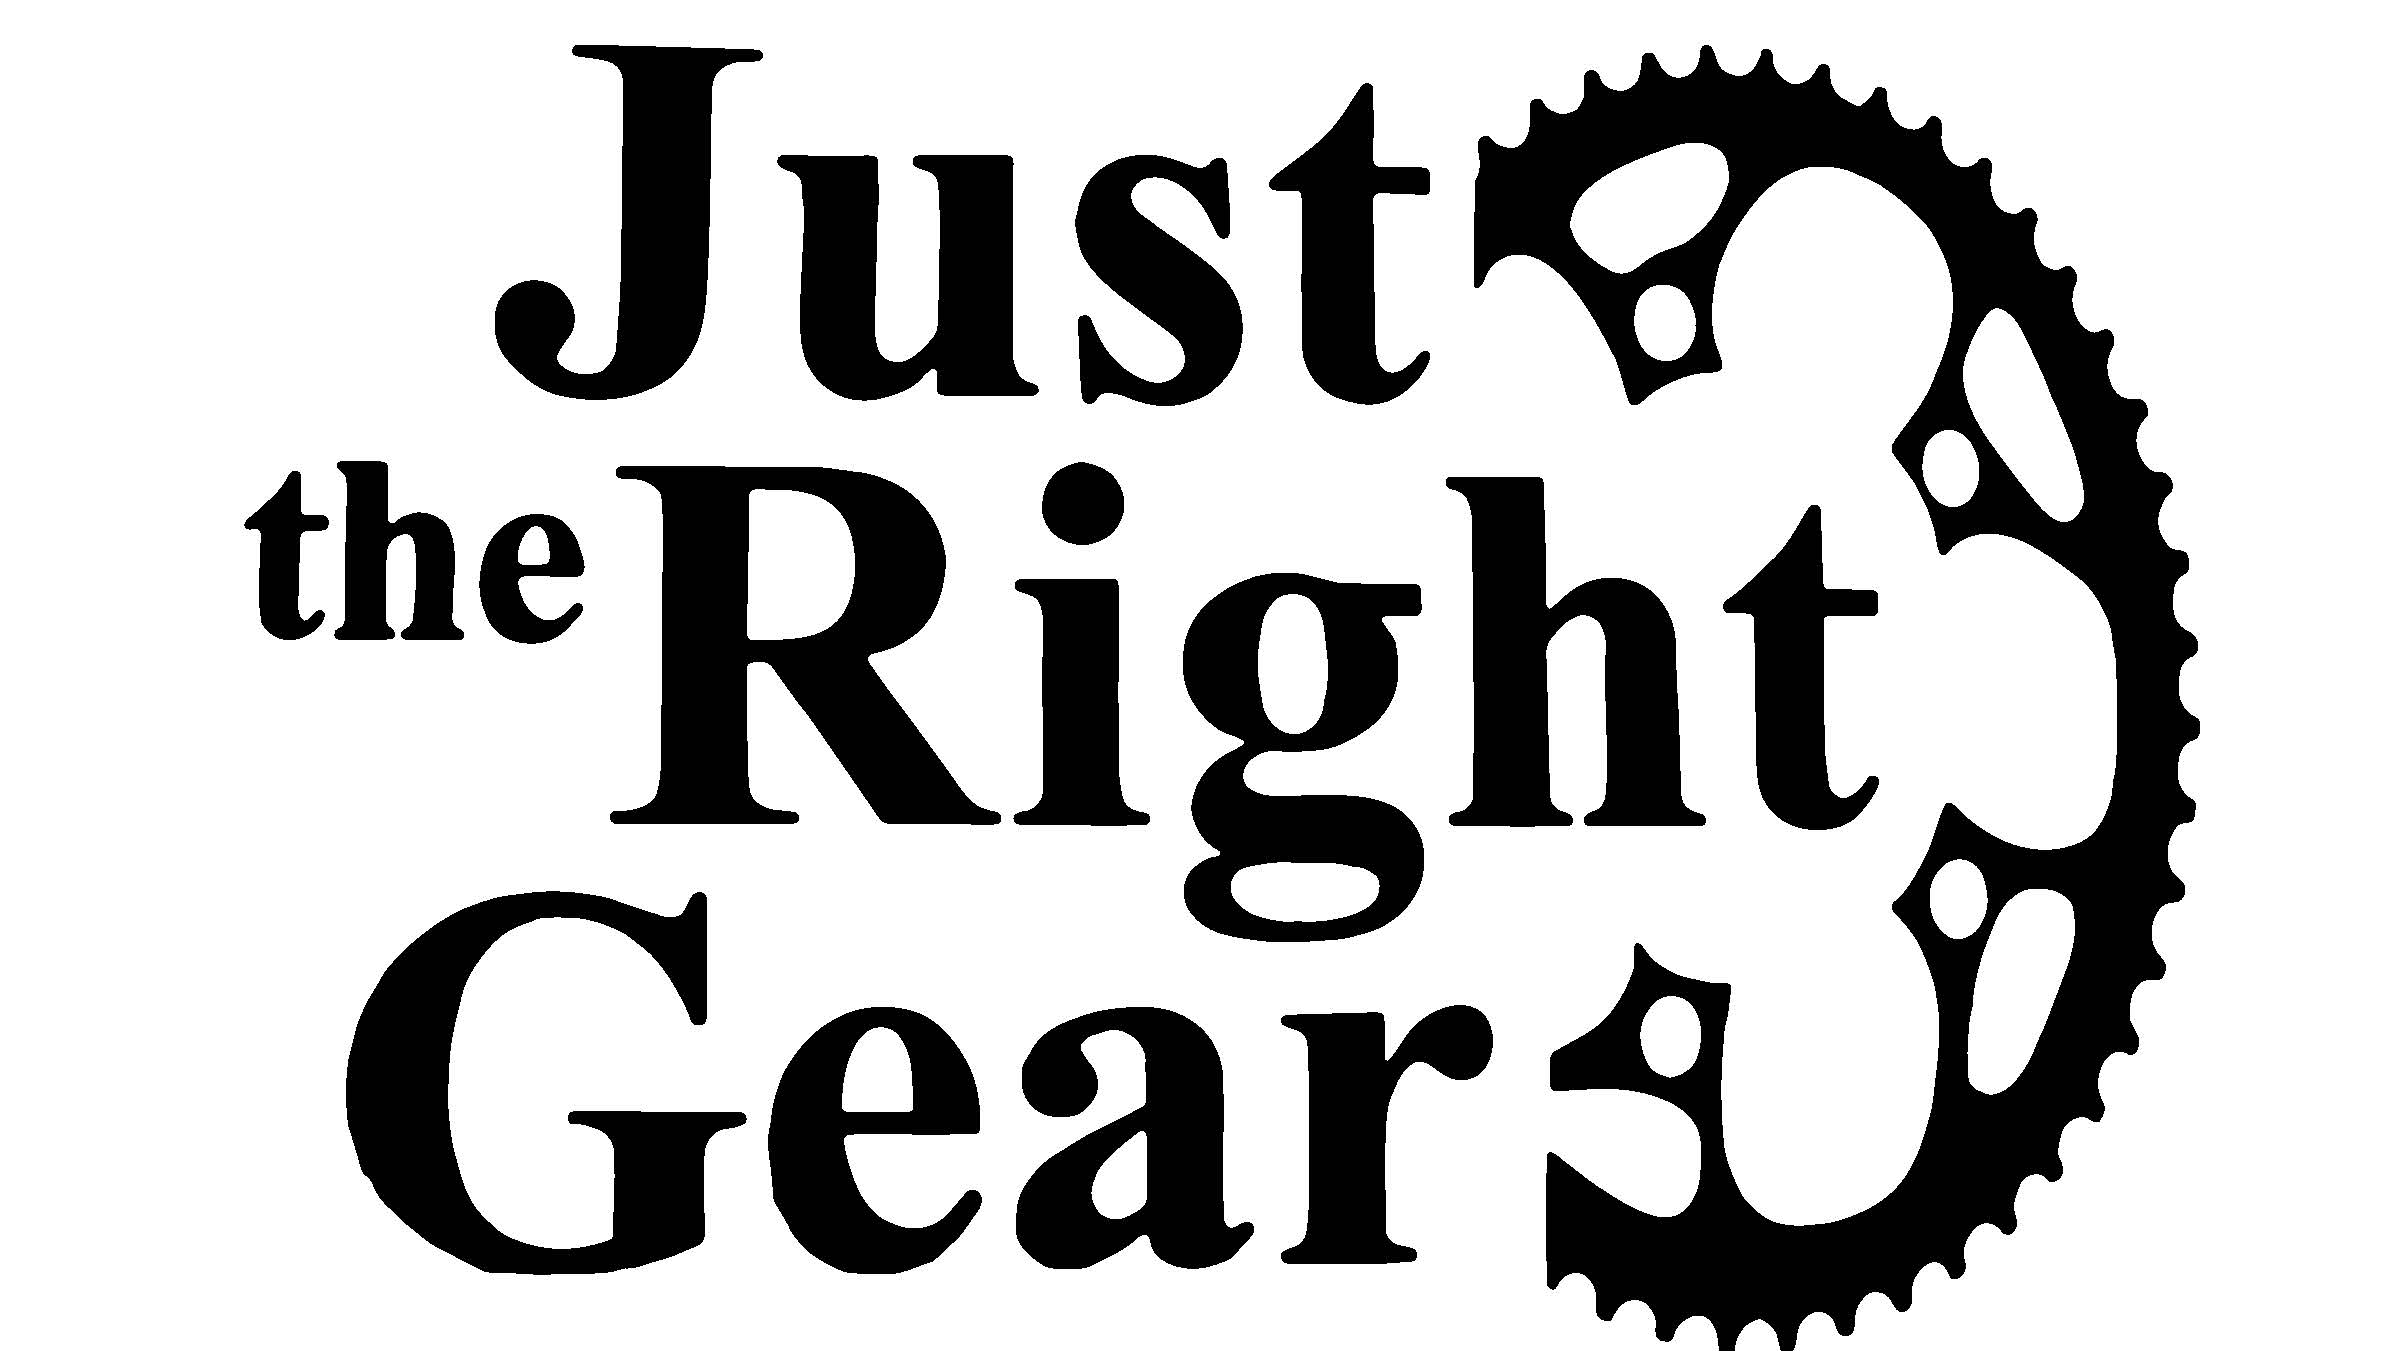 Just the Right Gear VECTOR LOGO (dragged) 1.jpg